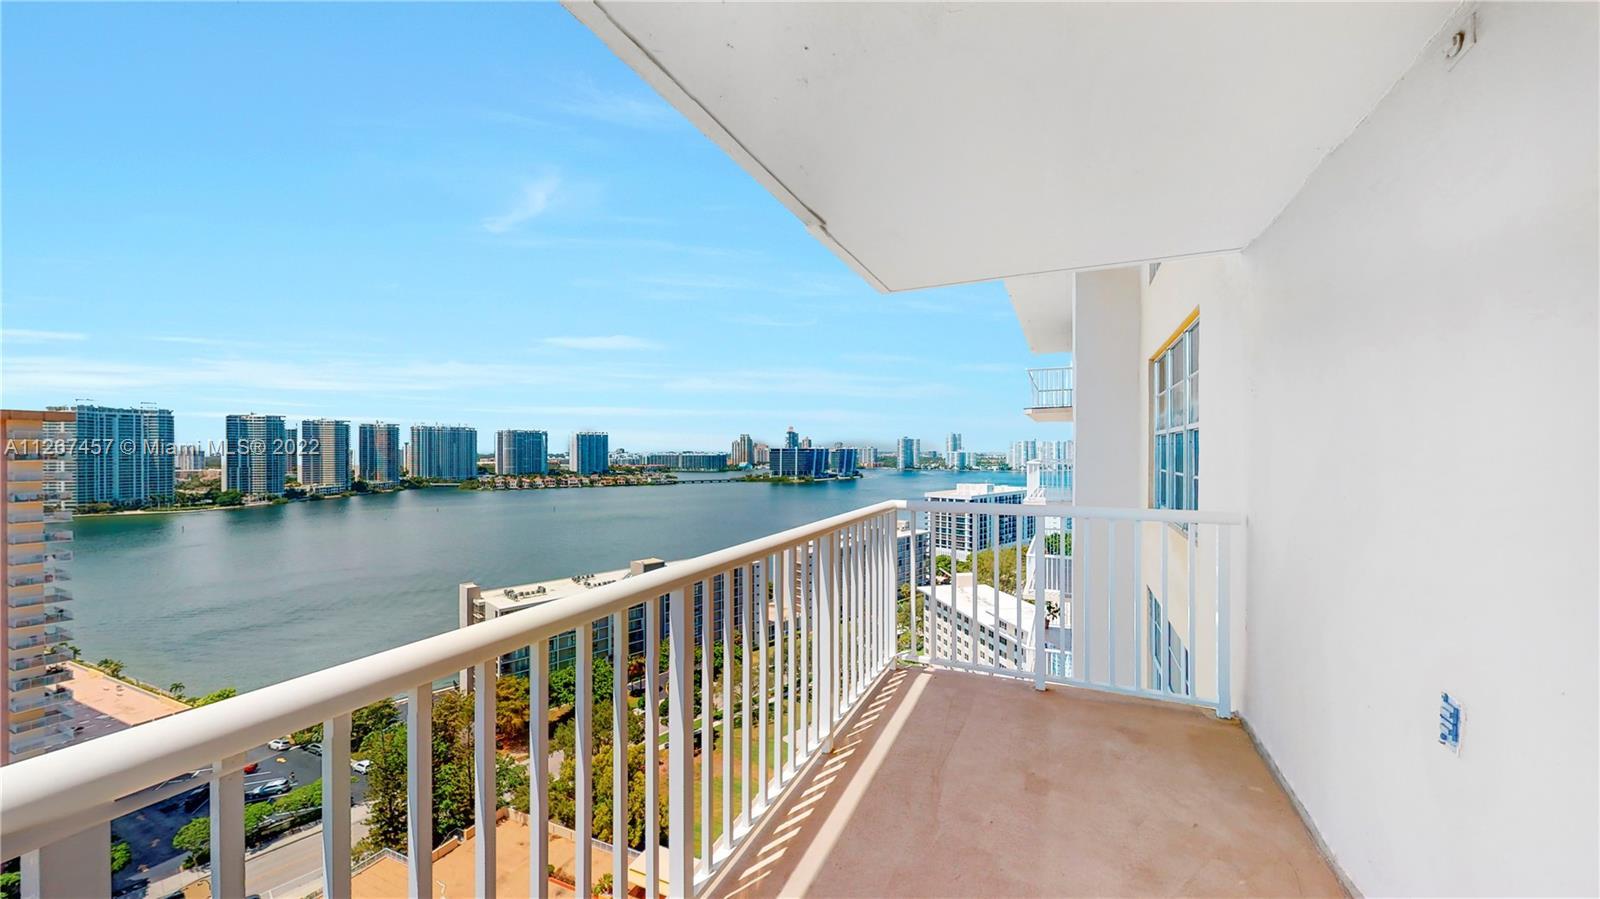 STUNNING CORNER RESIDENCE WITH OCEAN AND BAY VIEWS.  LOCATED ON THE S/W CORNER OF THE BUILDING THIS 